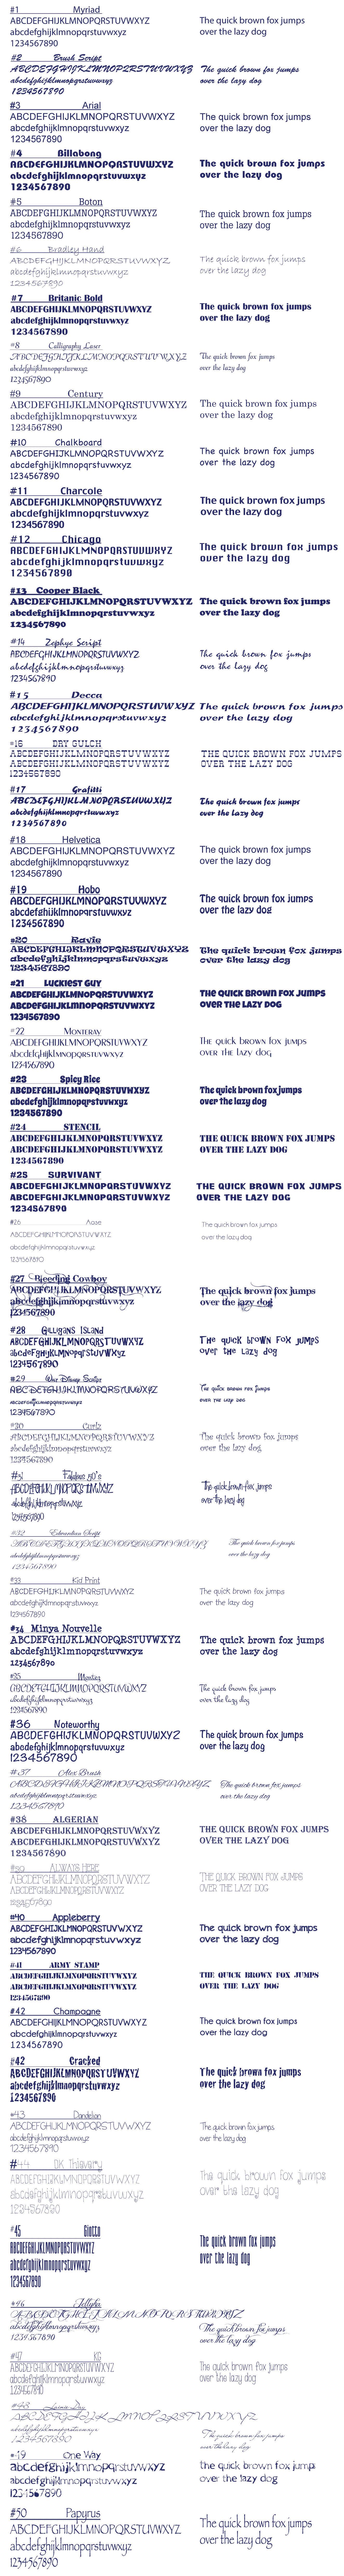 Font choices